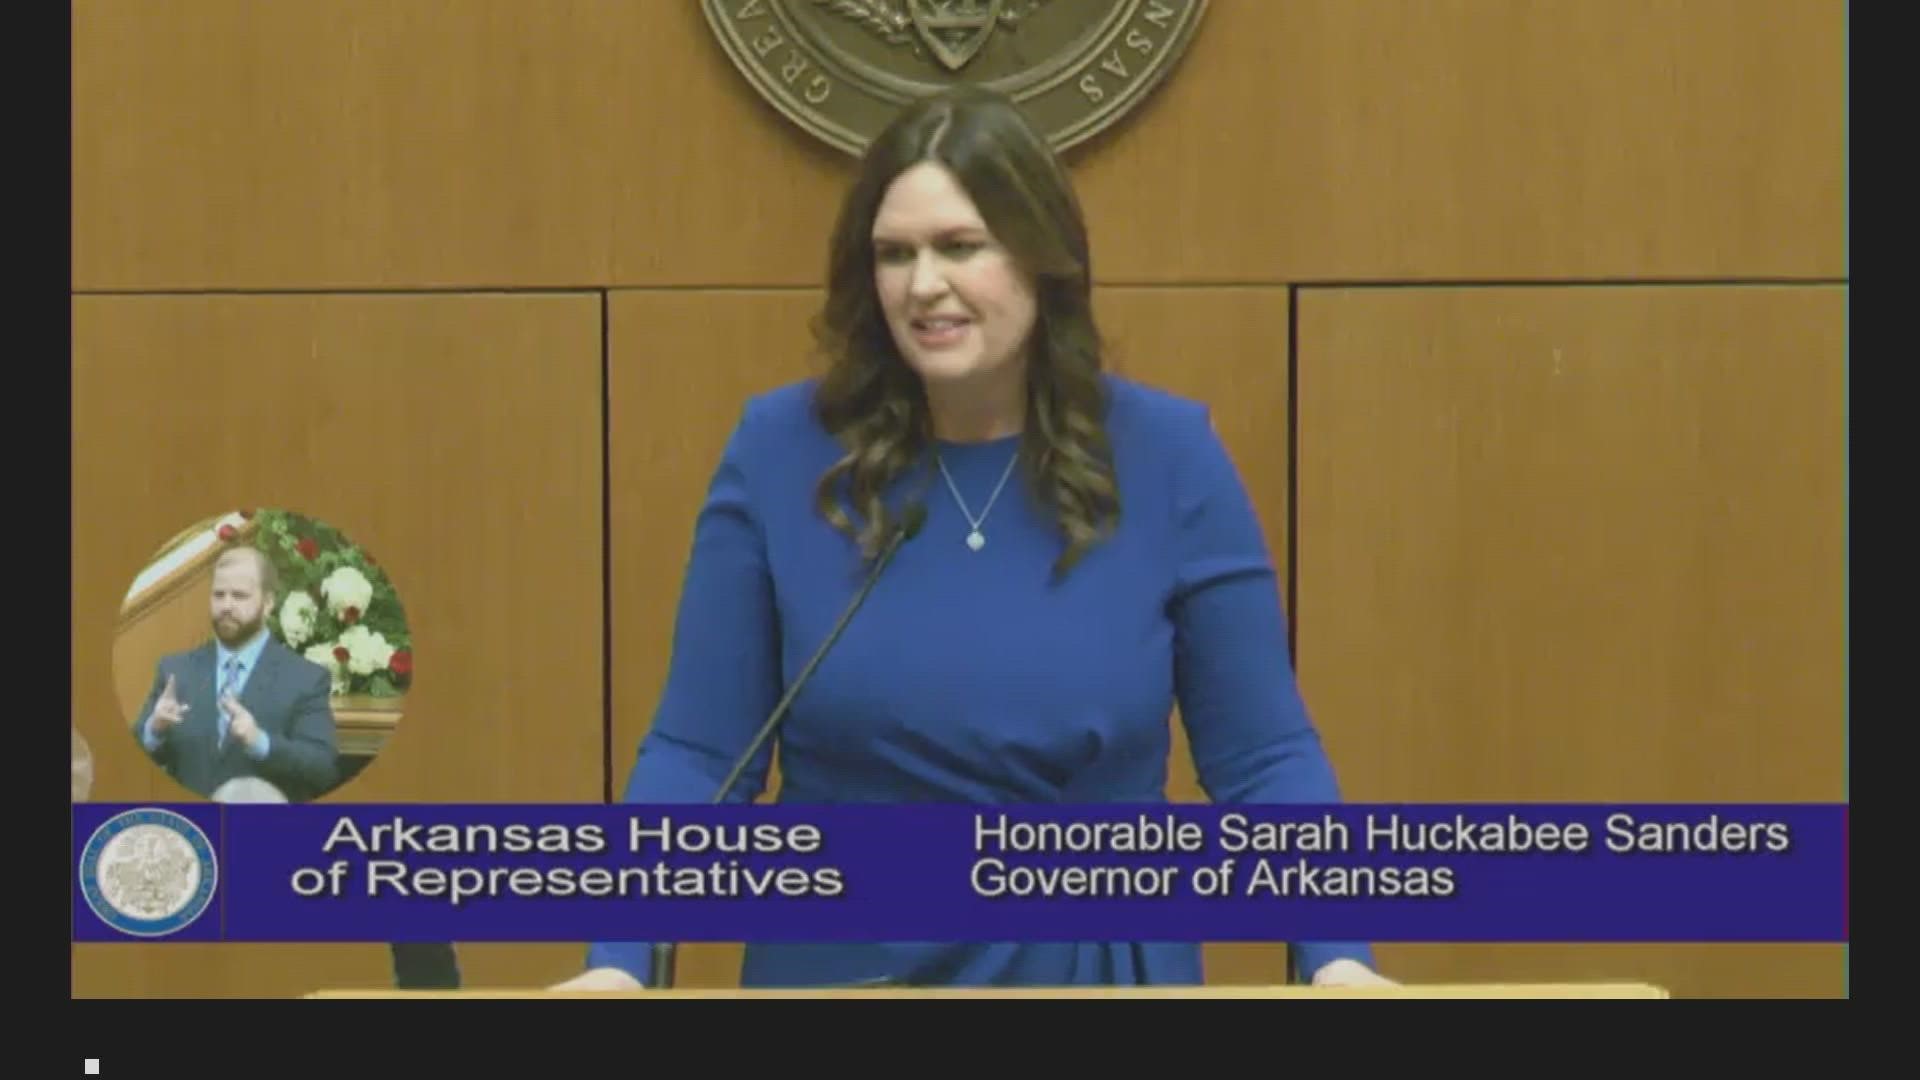 Sarah Huckabee Sanders makes her first remarks after being sworn in as the Governor of Arkansas on January 10, 2023. | Full Speech